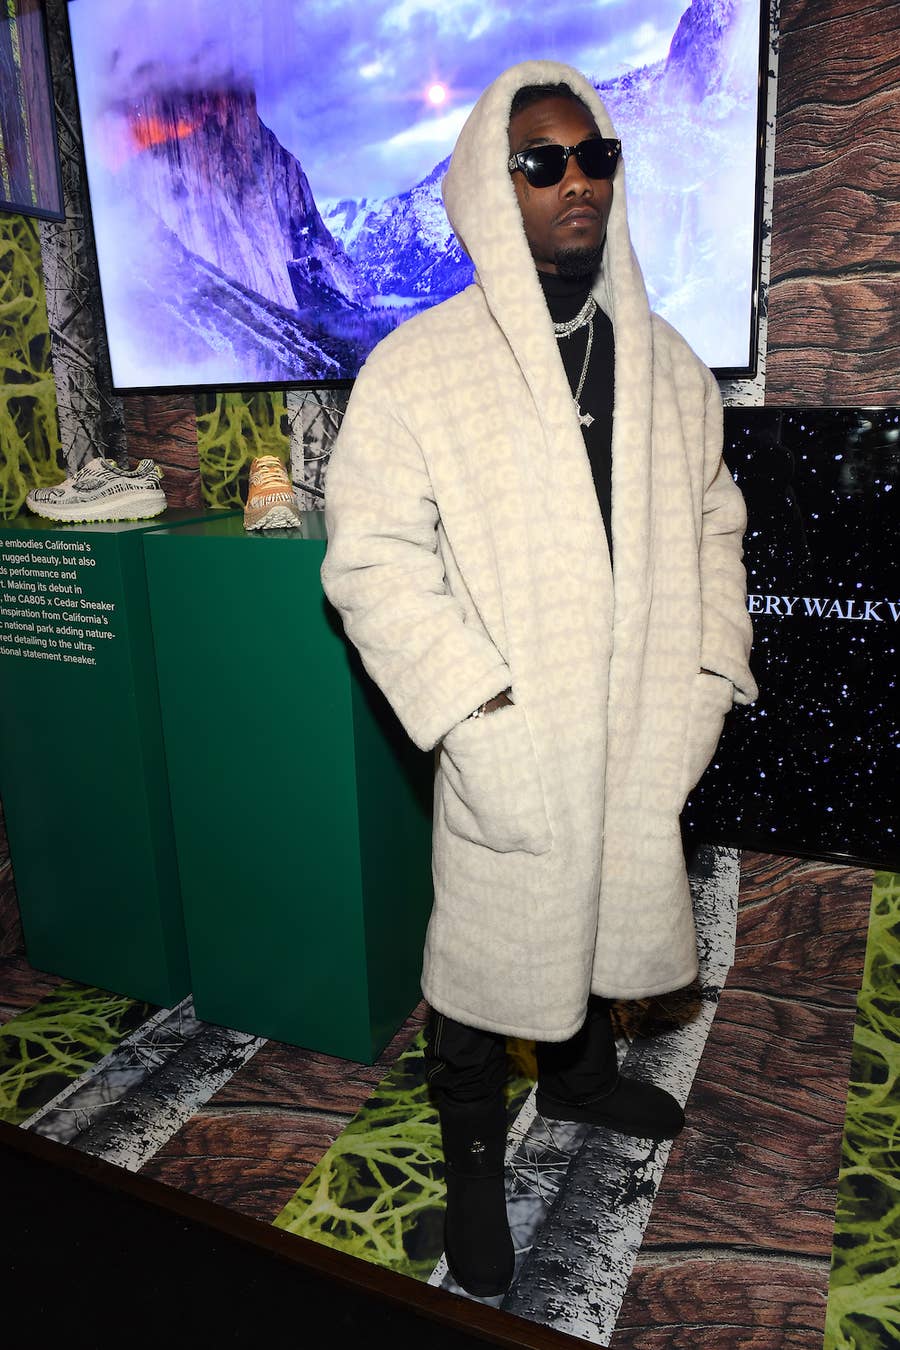 How to Wear Uggs, According to Pharrell Williams, Rihanna, Drake, and More